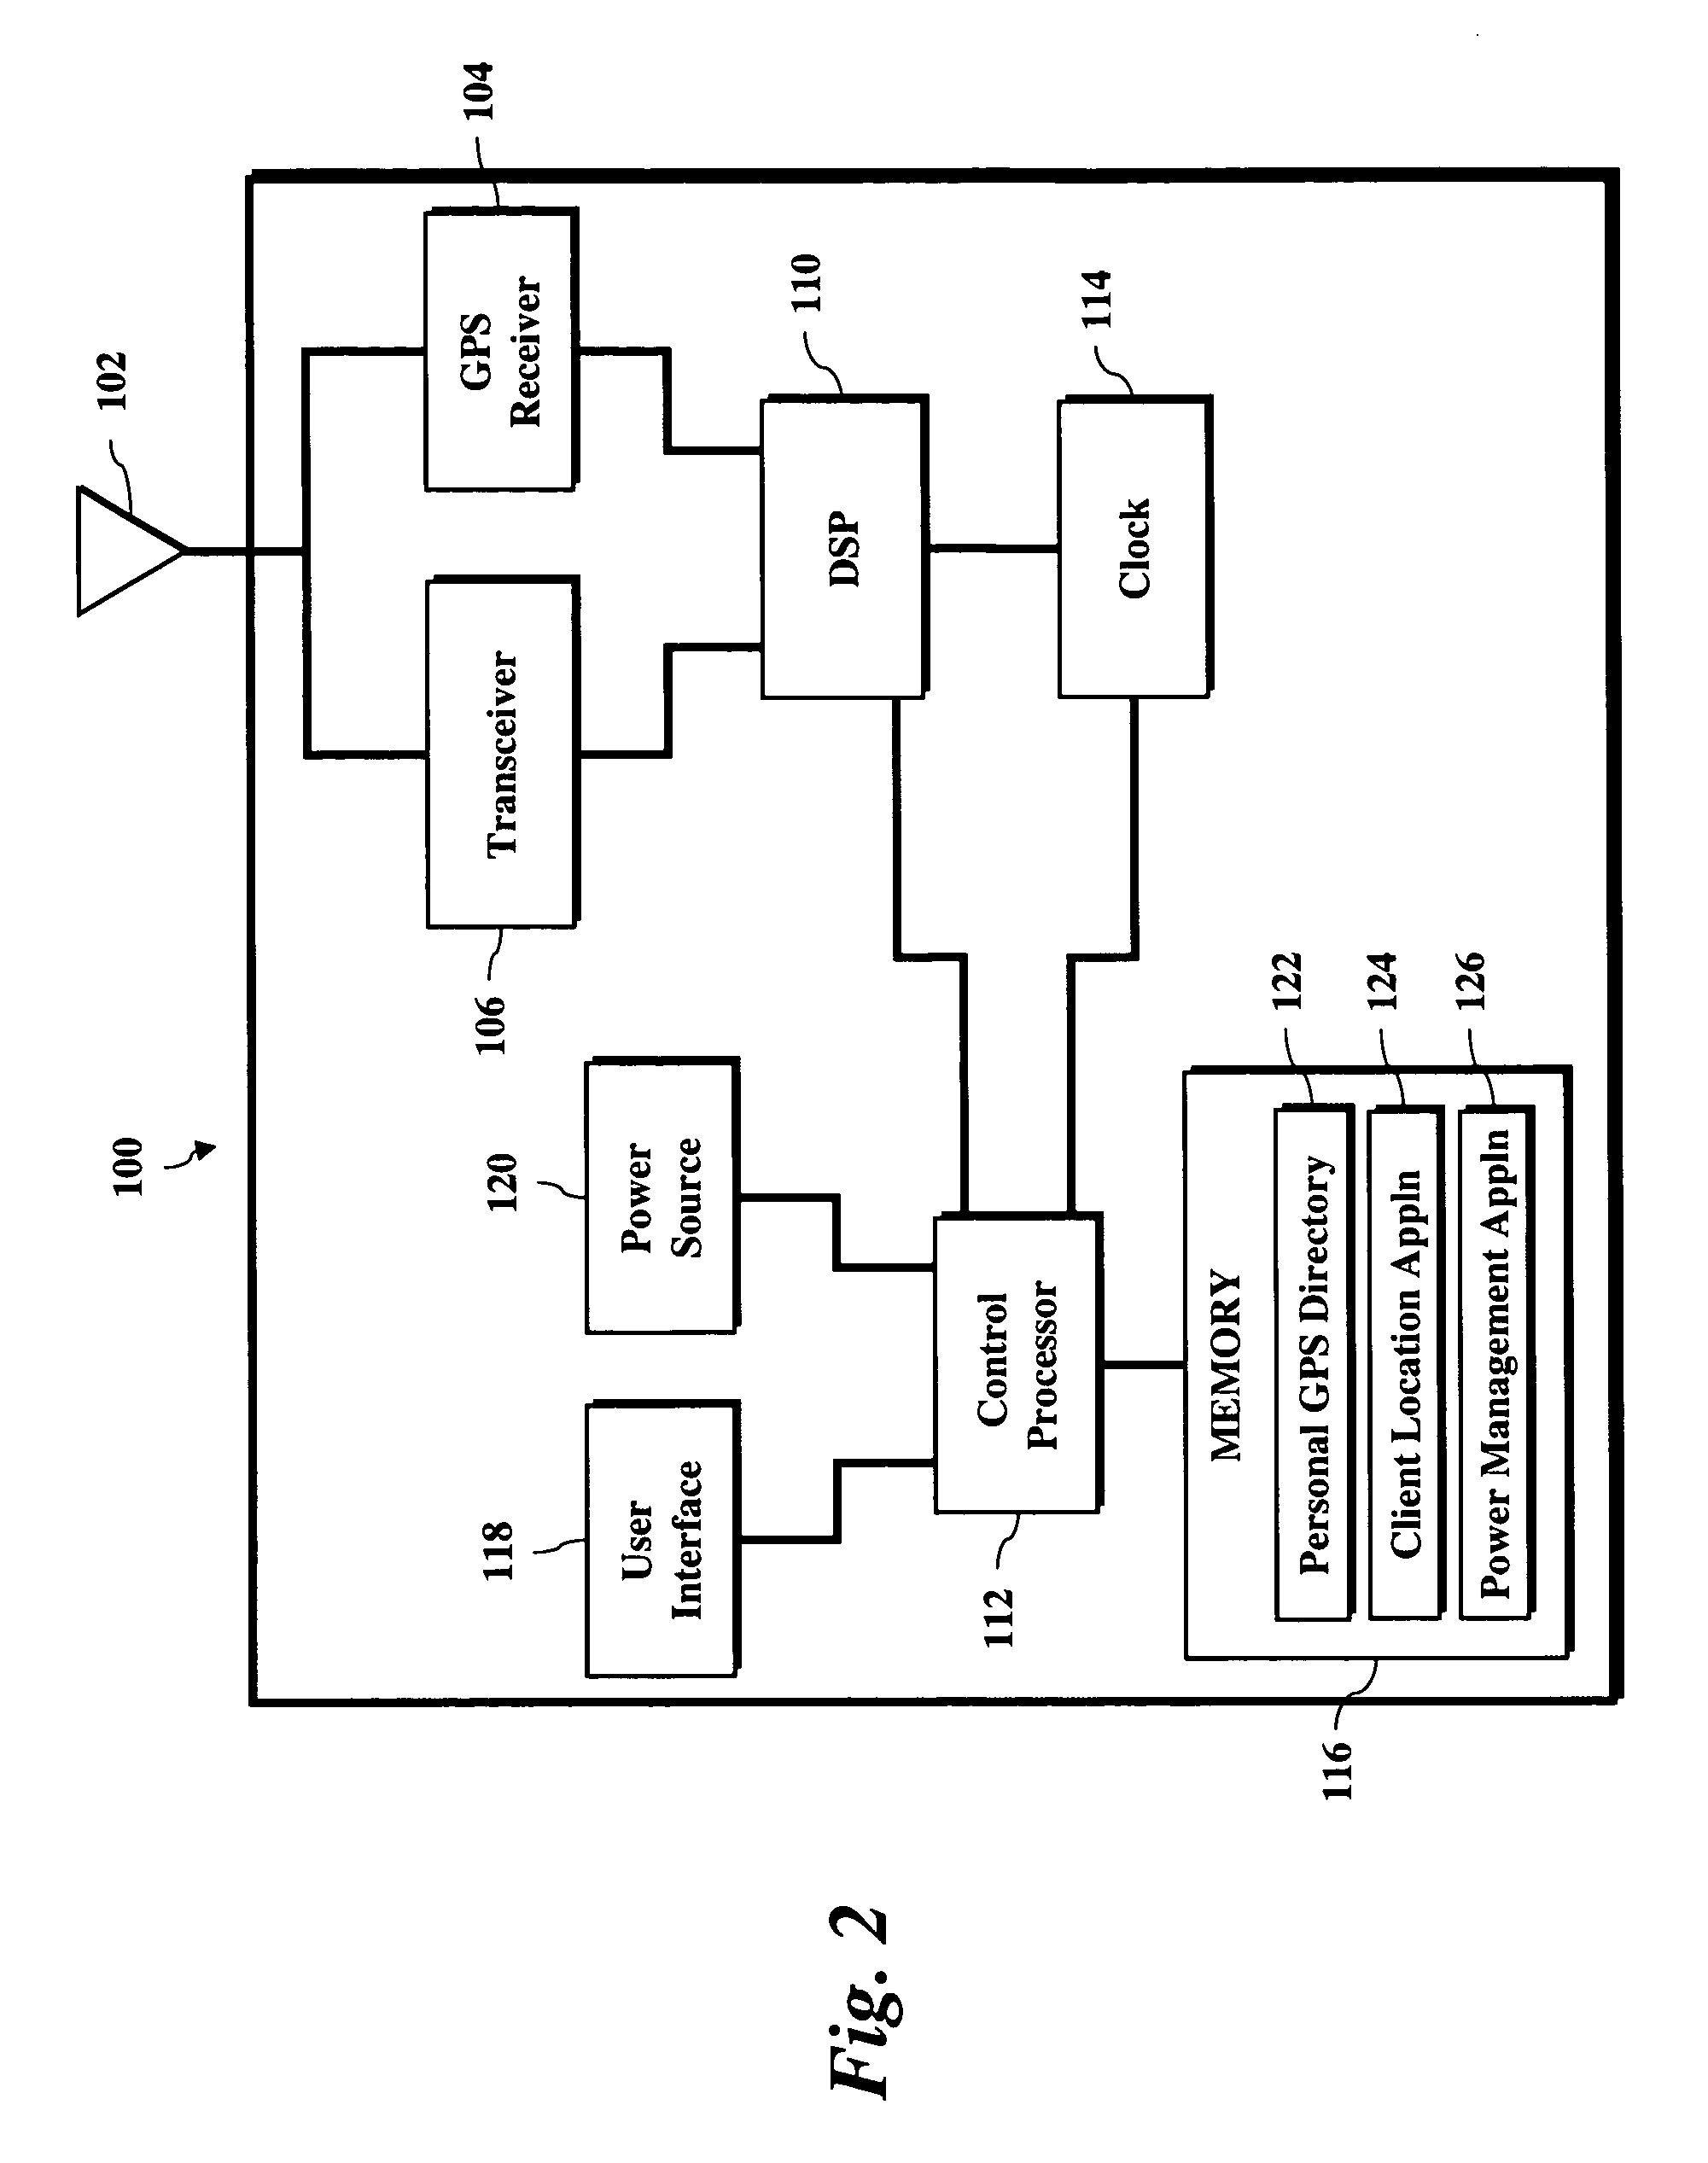 System and method for recovering a lost or stolen wireless device